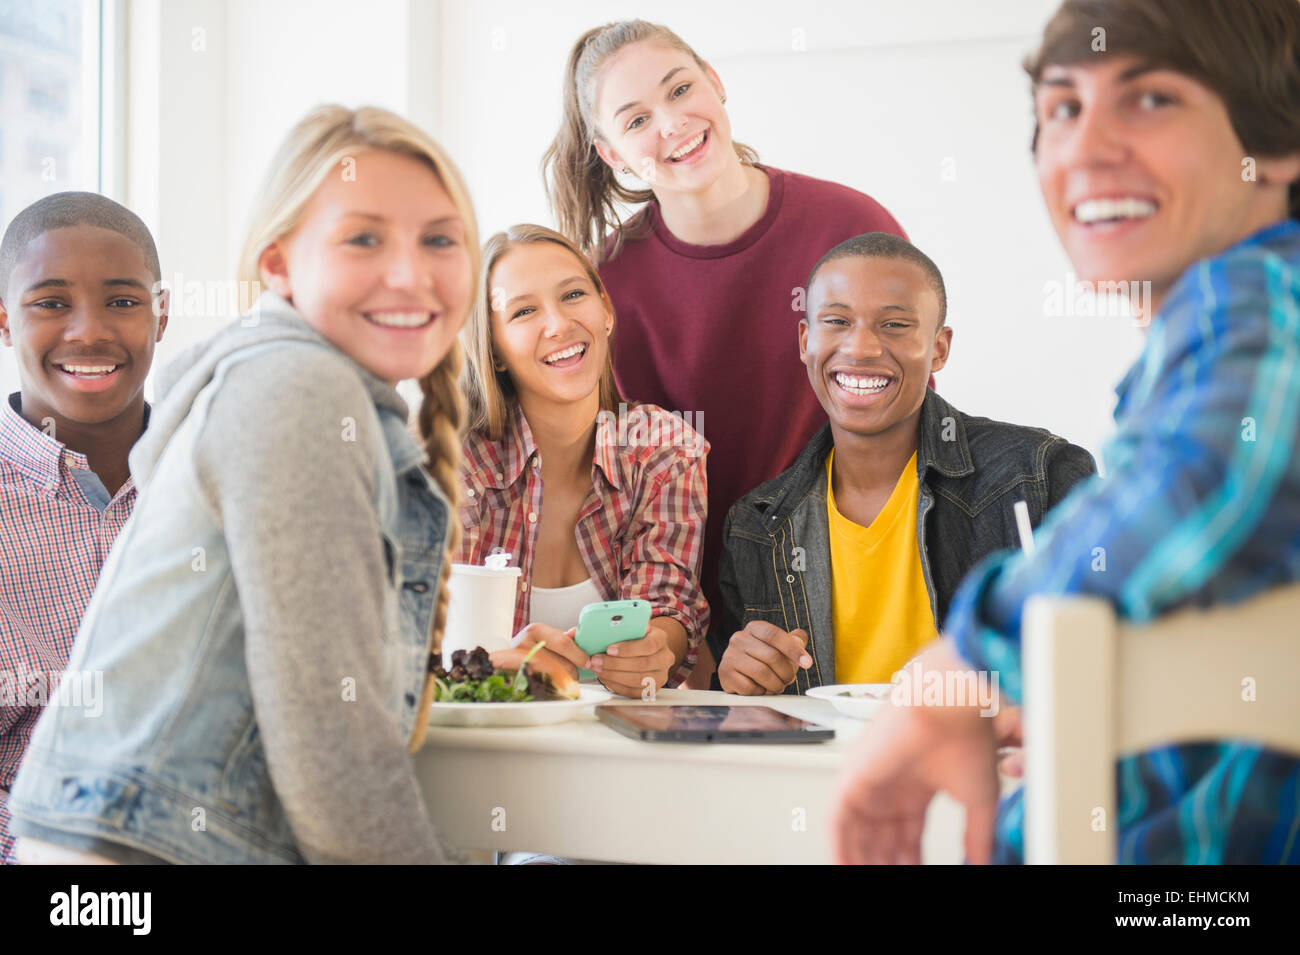 Teenagers smiling at table Stock Photo